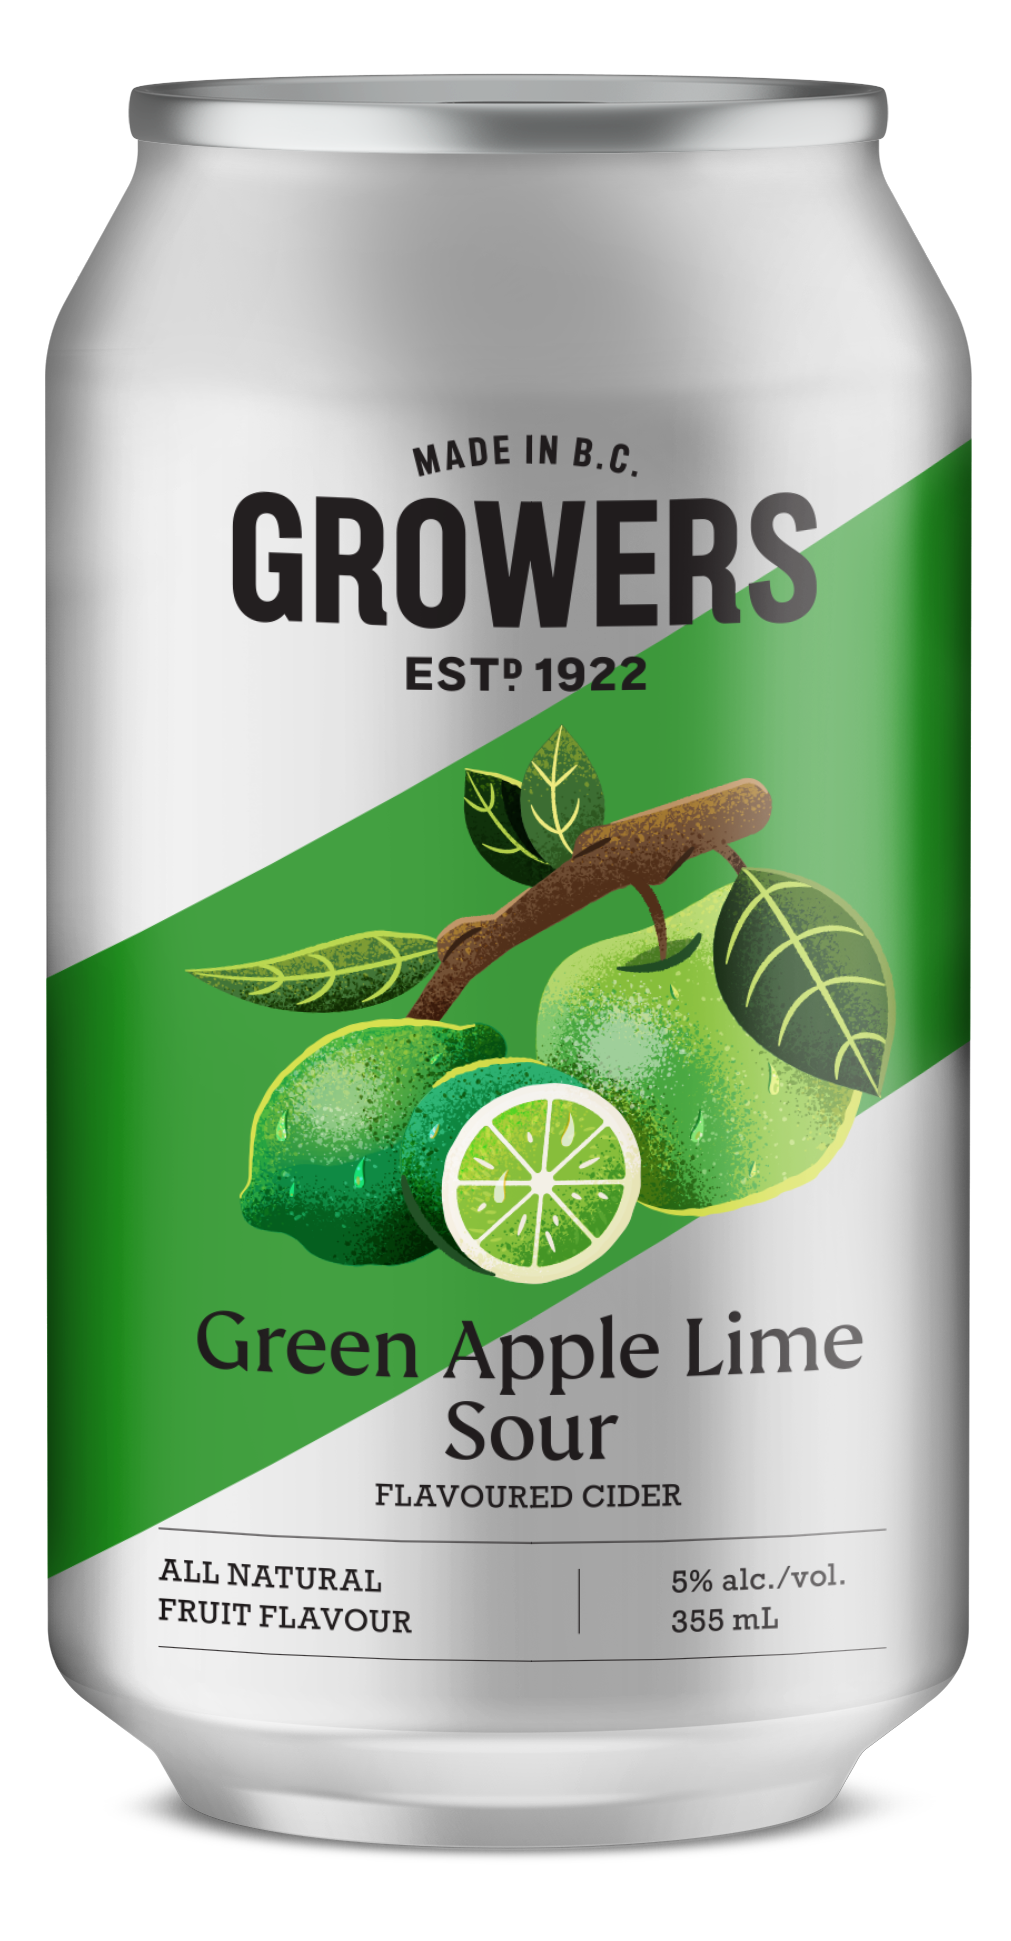 Can of Growers Green Apple Lime Sour cider